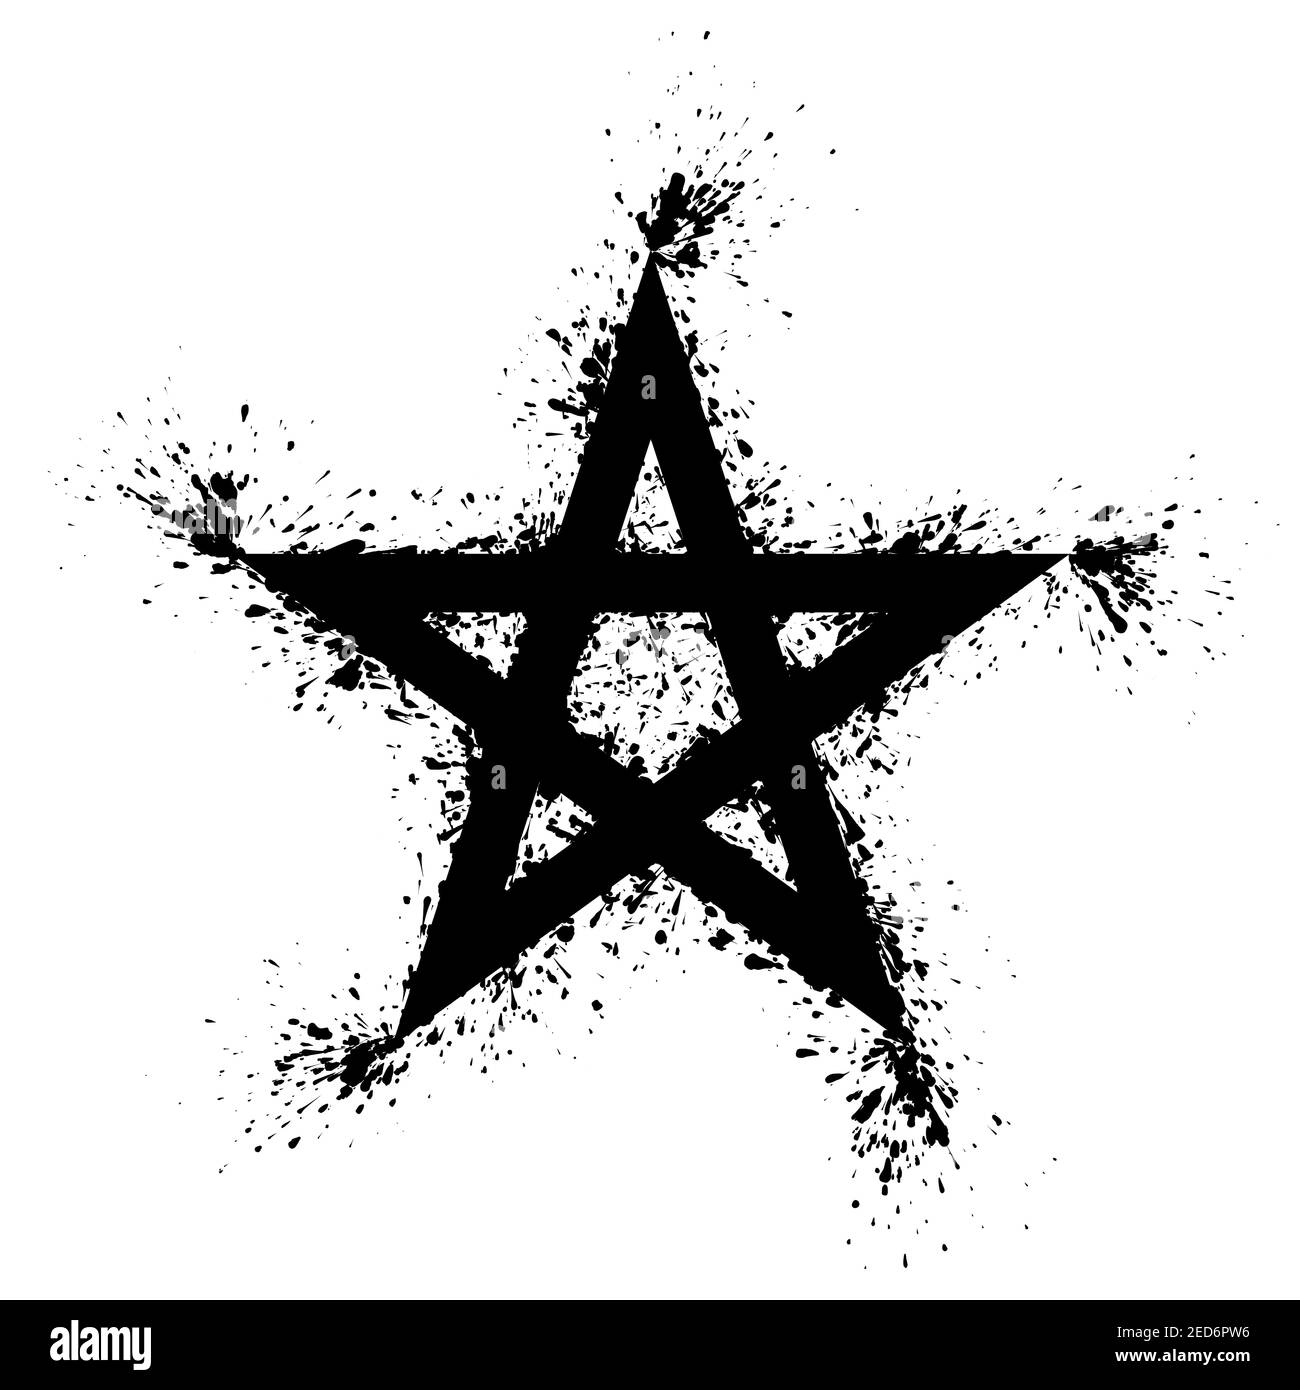 Pentagram splattered with black paint on white background. Five pointed star, splashed with black paint. Geometric star figure. Stock Photo